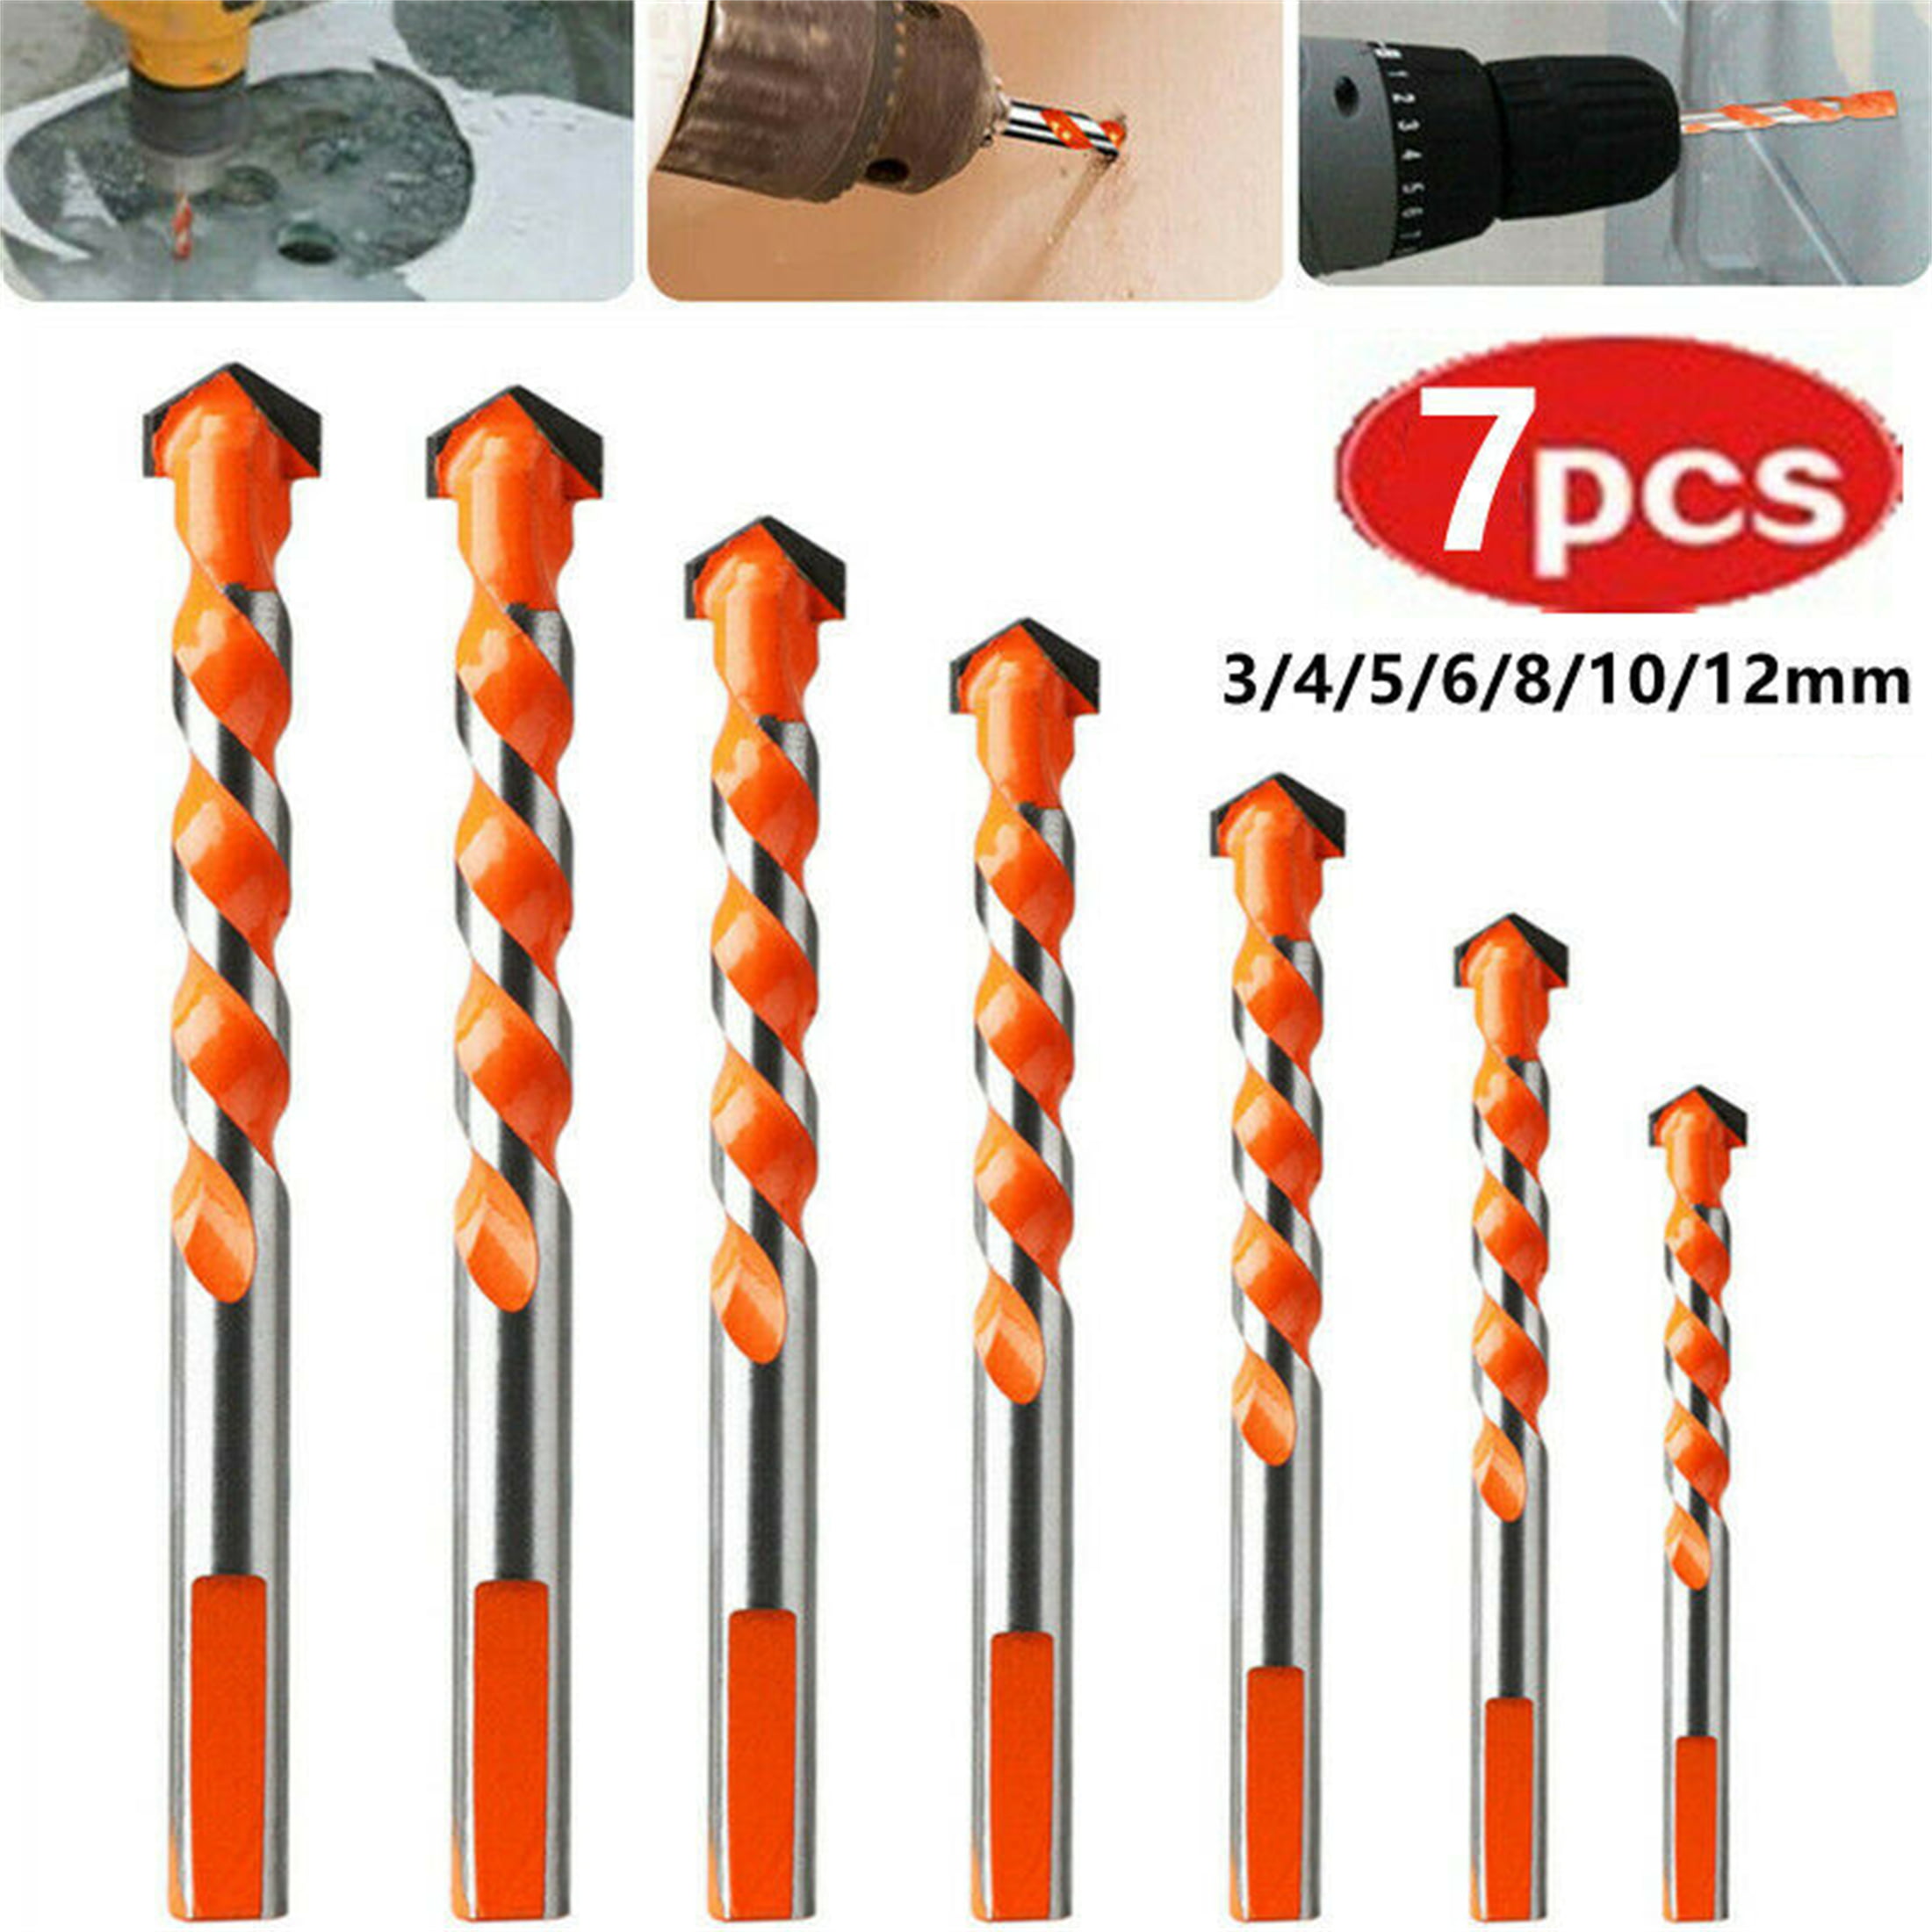 7PC Multifunctional Drill Bits Ceramic Glass Ultimate Punching Hole Working Sets 